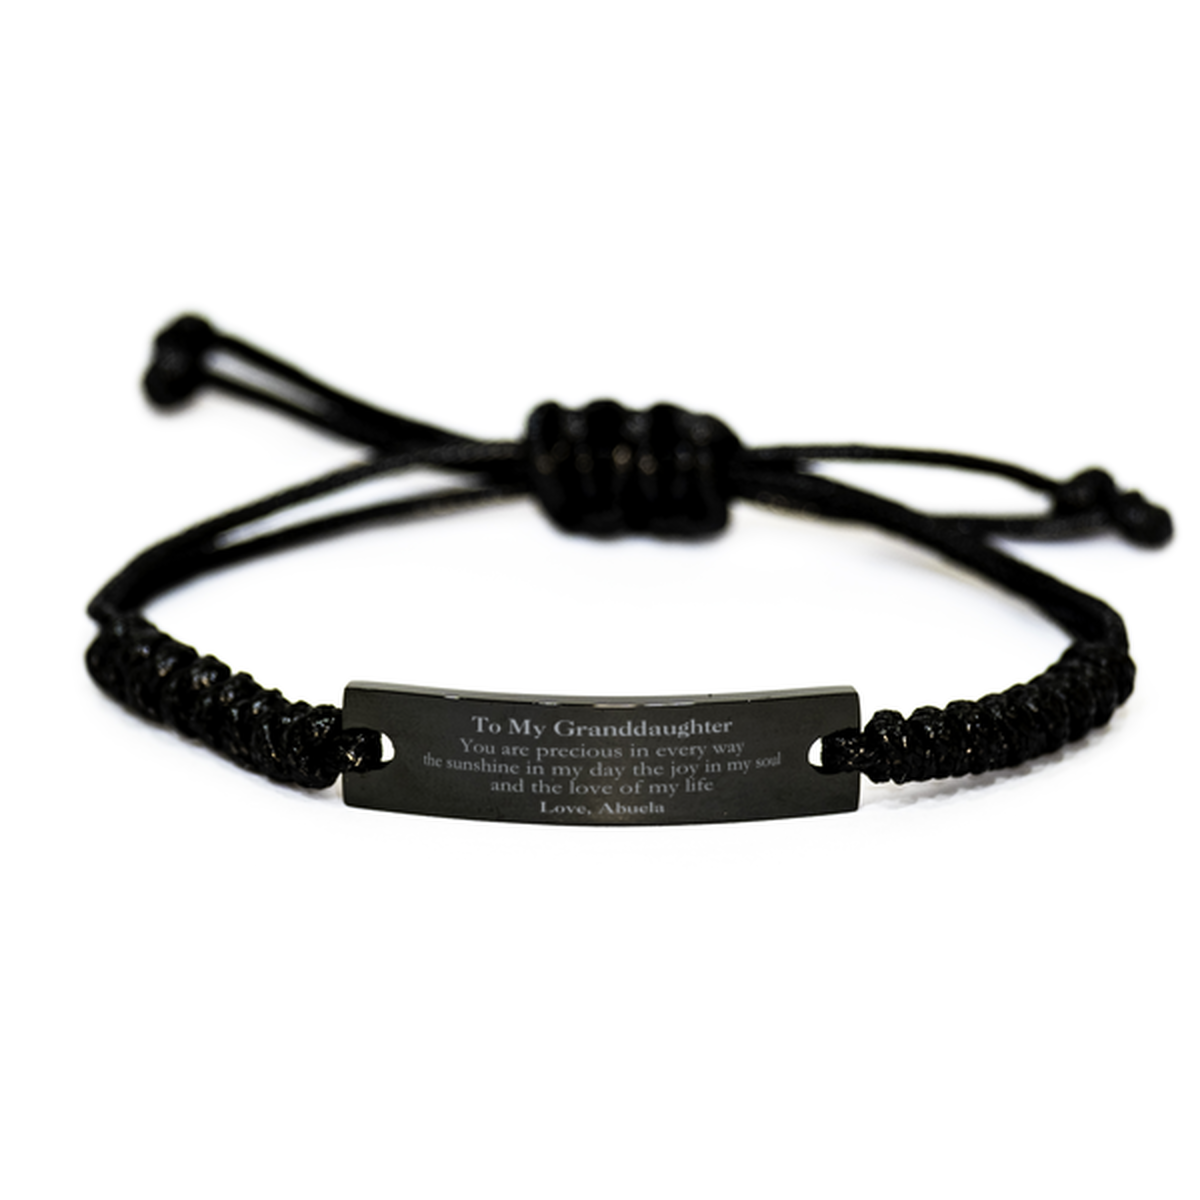 Graduation Gifts for Granddaughter Black Rope Bracelet Present from Abuela, Christmas Granddaughter Birthday Gifts Granddaughter You are precious in every way the sunshine in my day. Love, Abuela